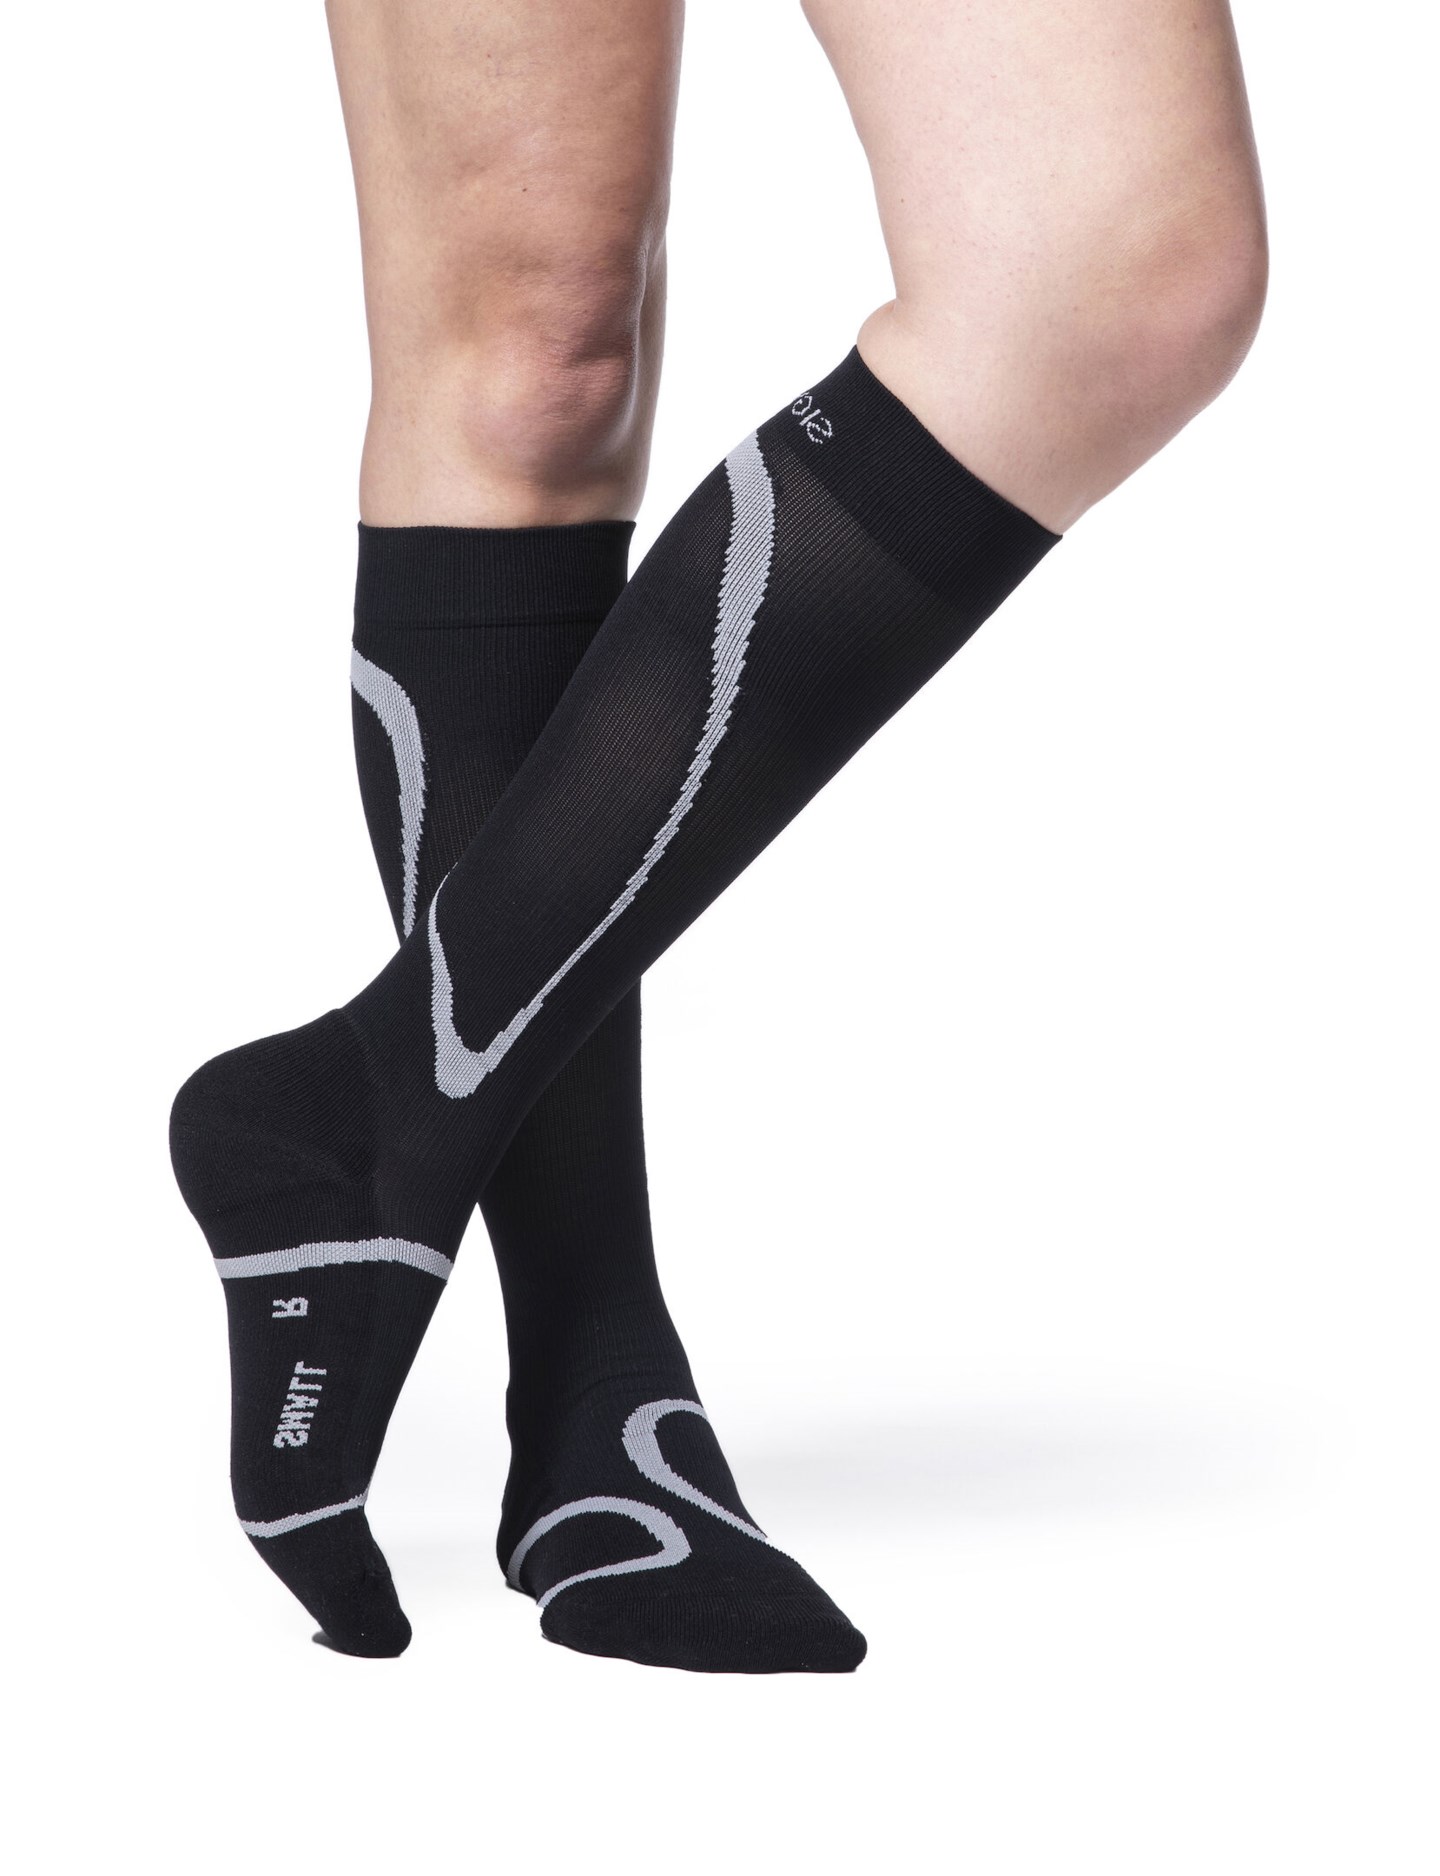 Sigvaris Motion High Tech Knee High Compression Stockings